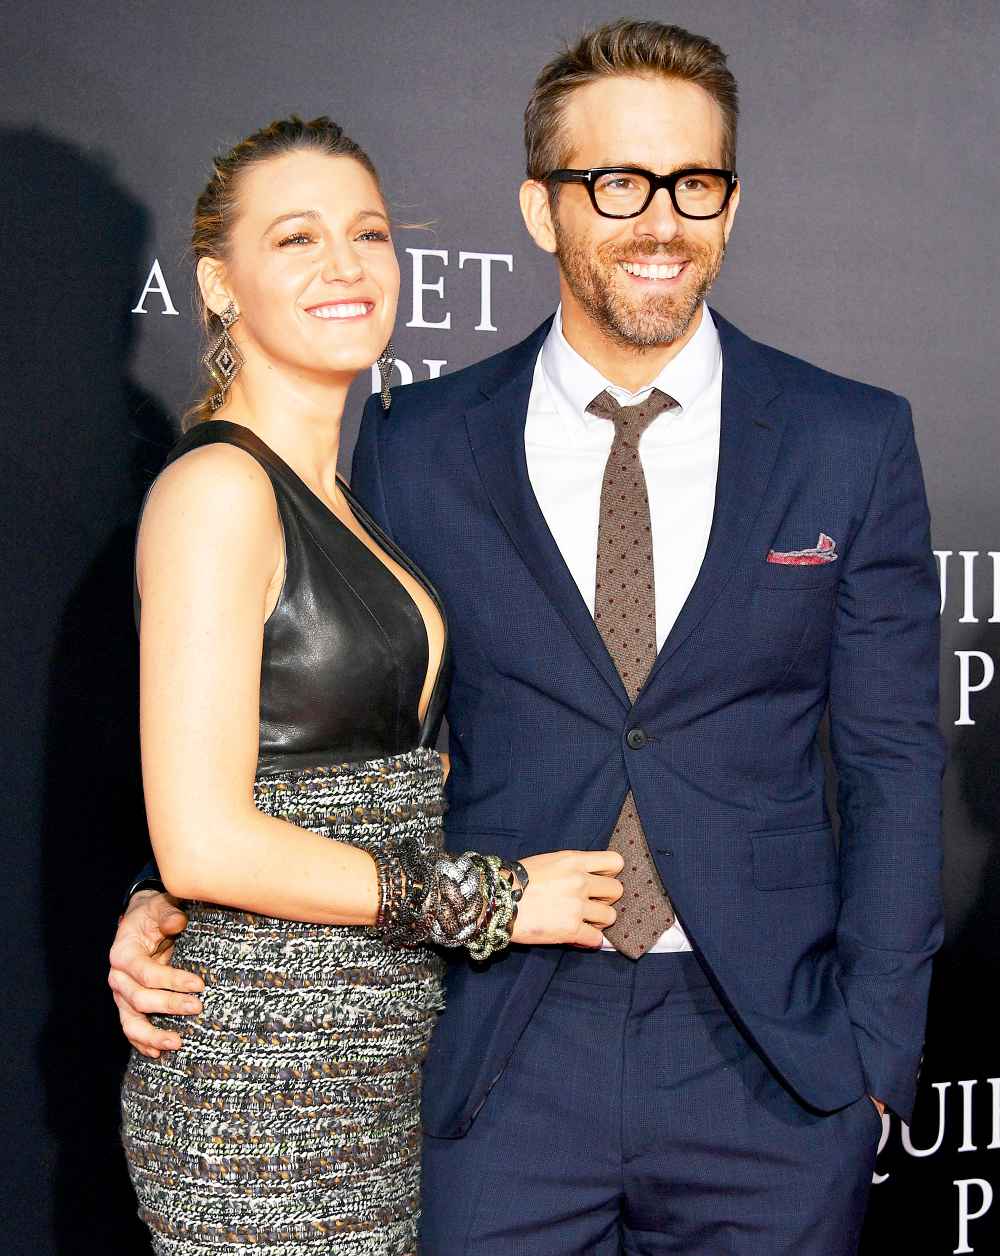 Blake Lively and Ryan Reynolds attend the "A Quiet Place" New York 2018 Premiere at AMC Lincoln Square Theater in New York City.